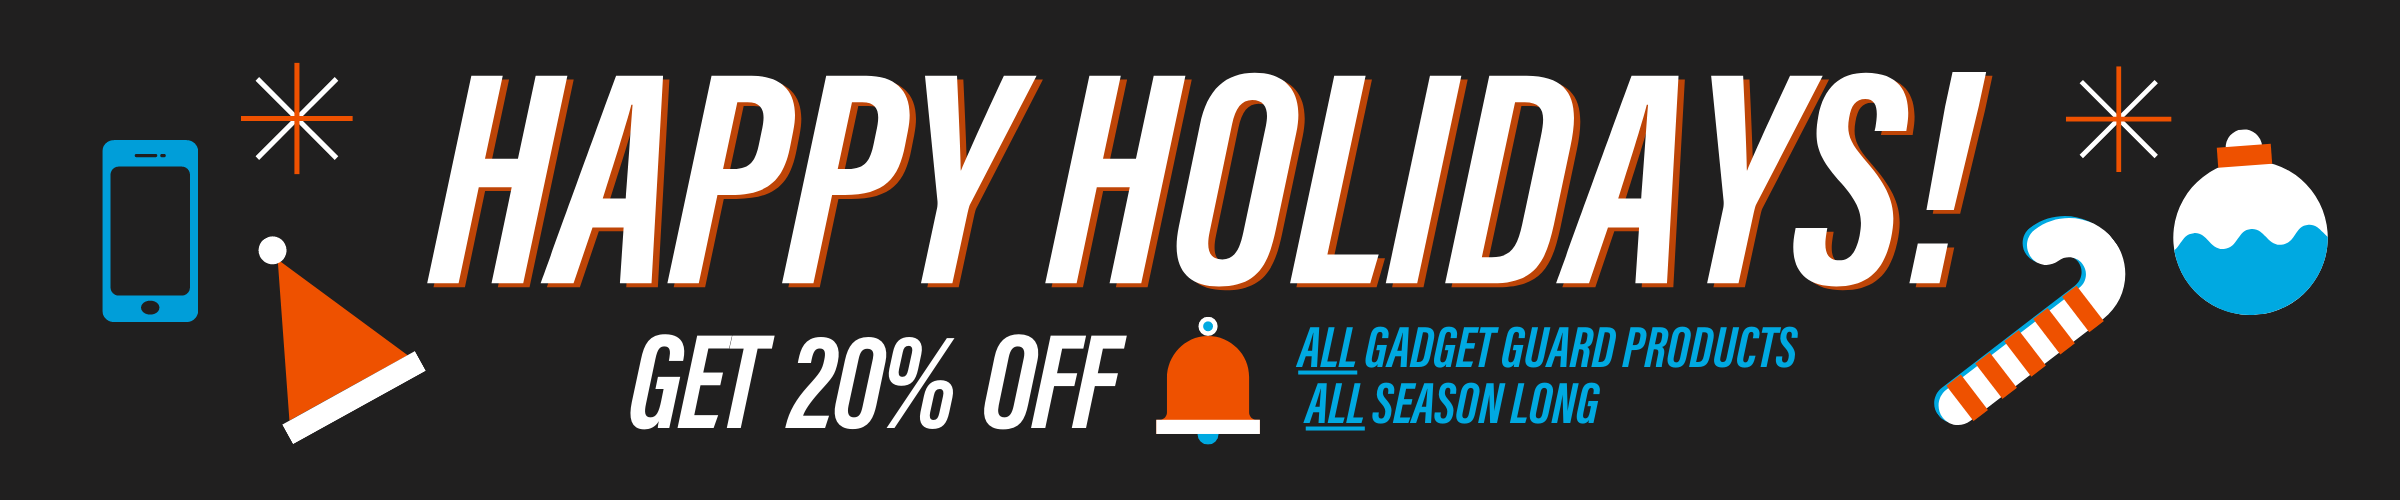 promo banner 20% off happy holiday